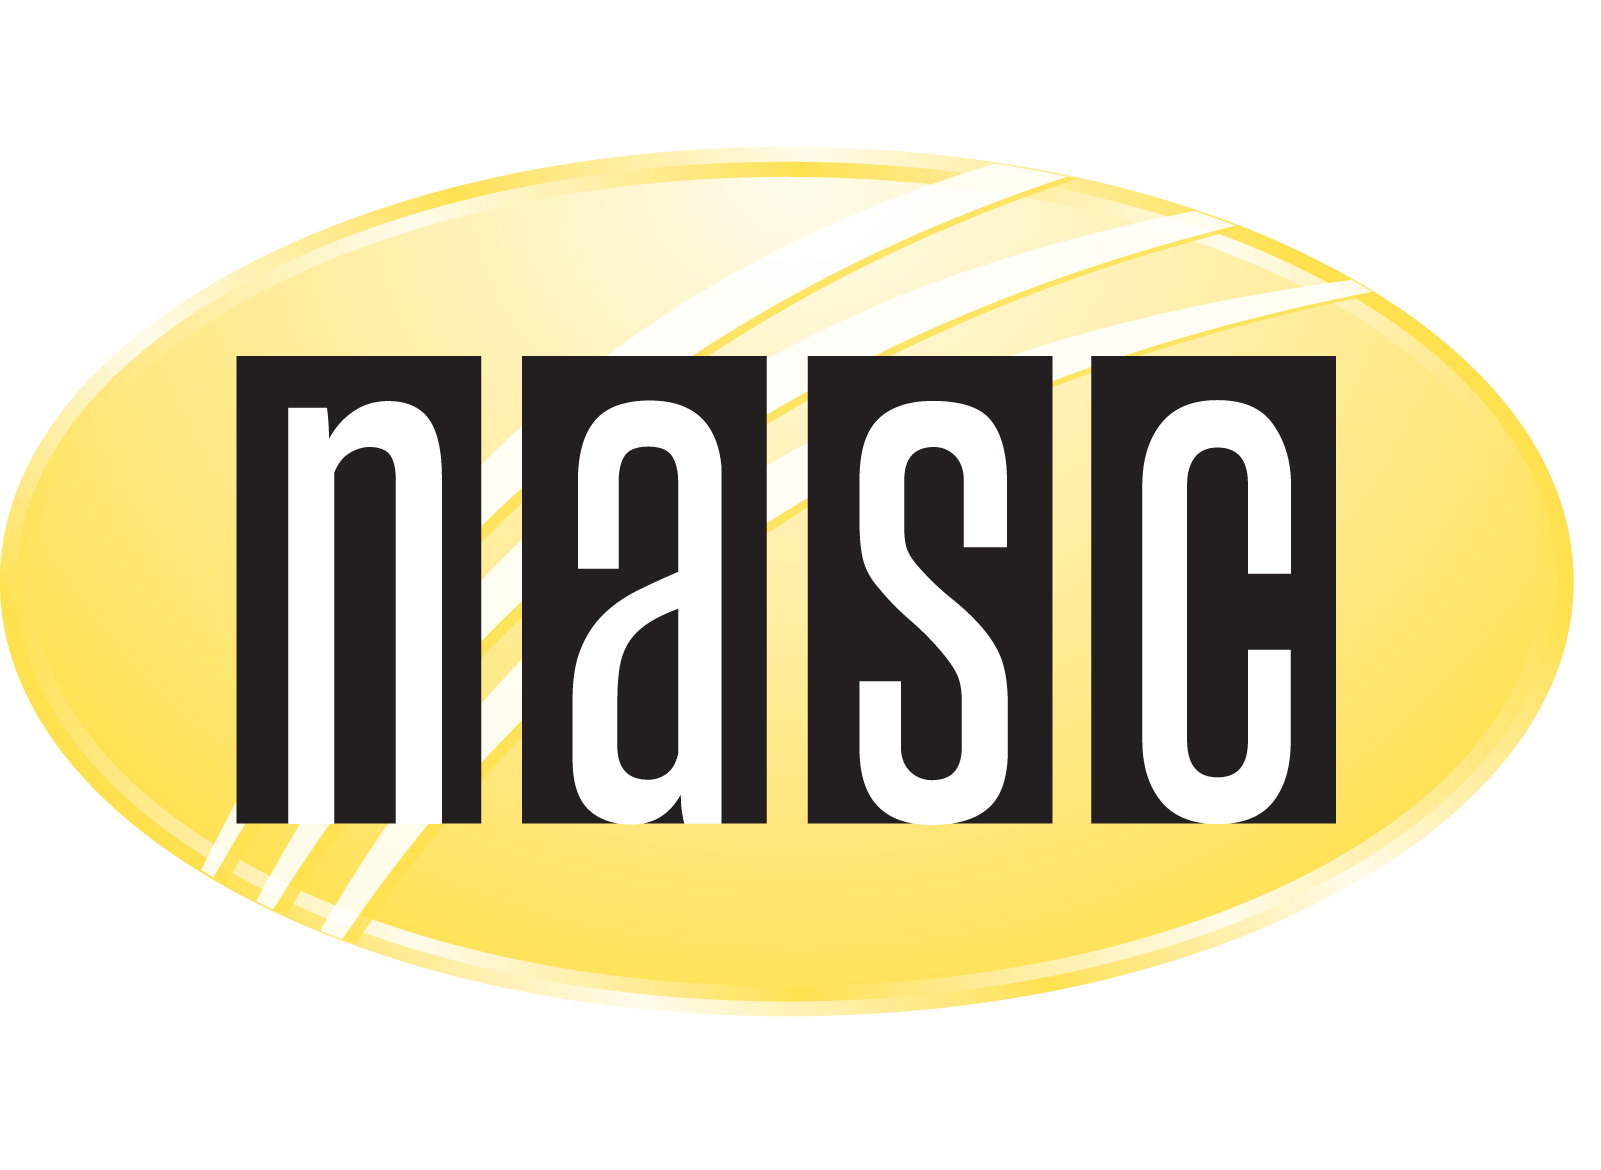 National Animal Supplement Council 